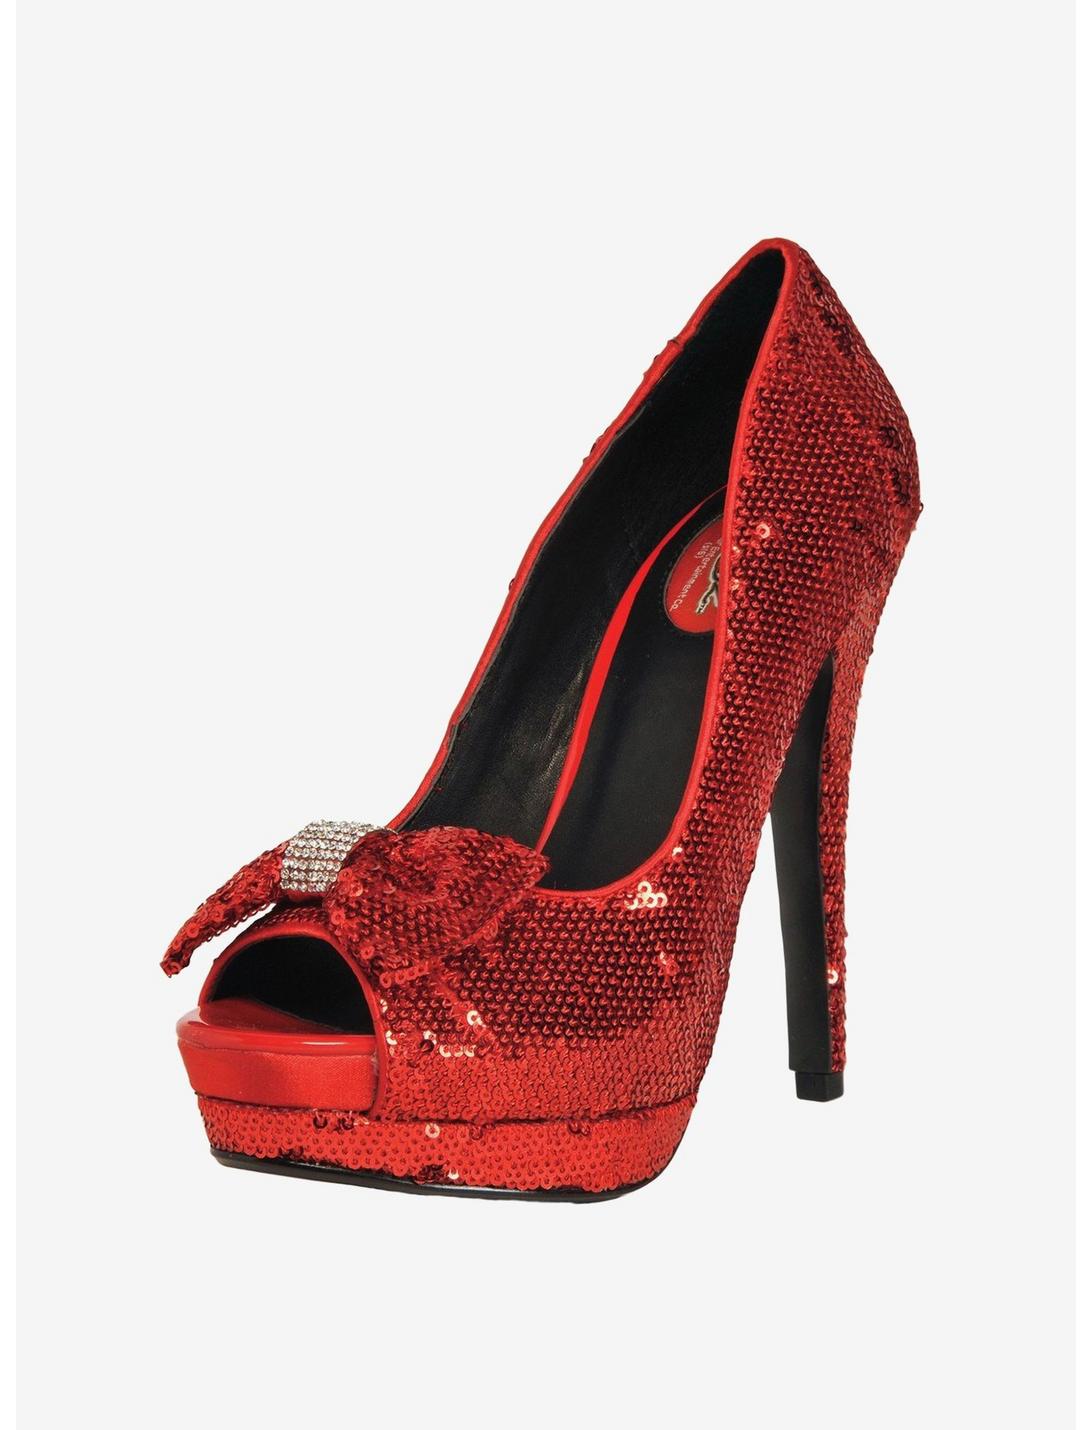 Women's 5" Red Sequin Heels With Diamond Bow, RED, hi-res